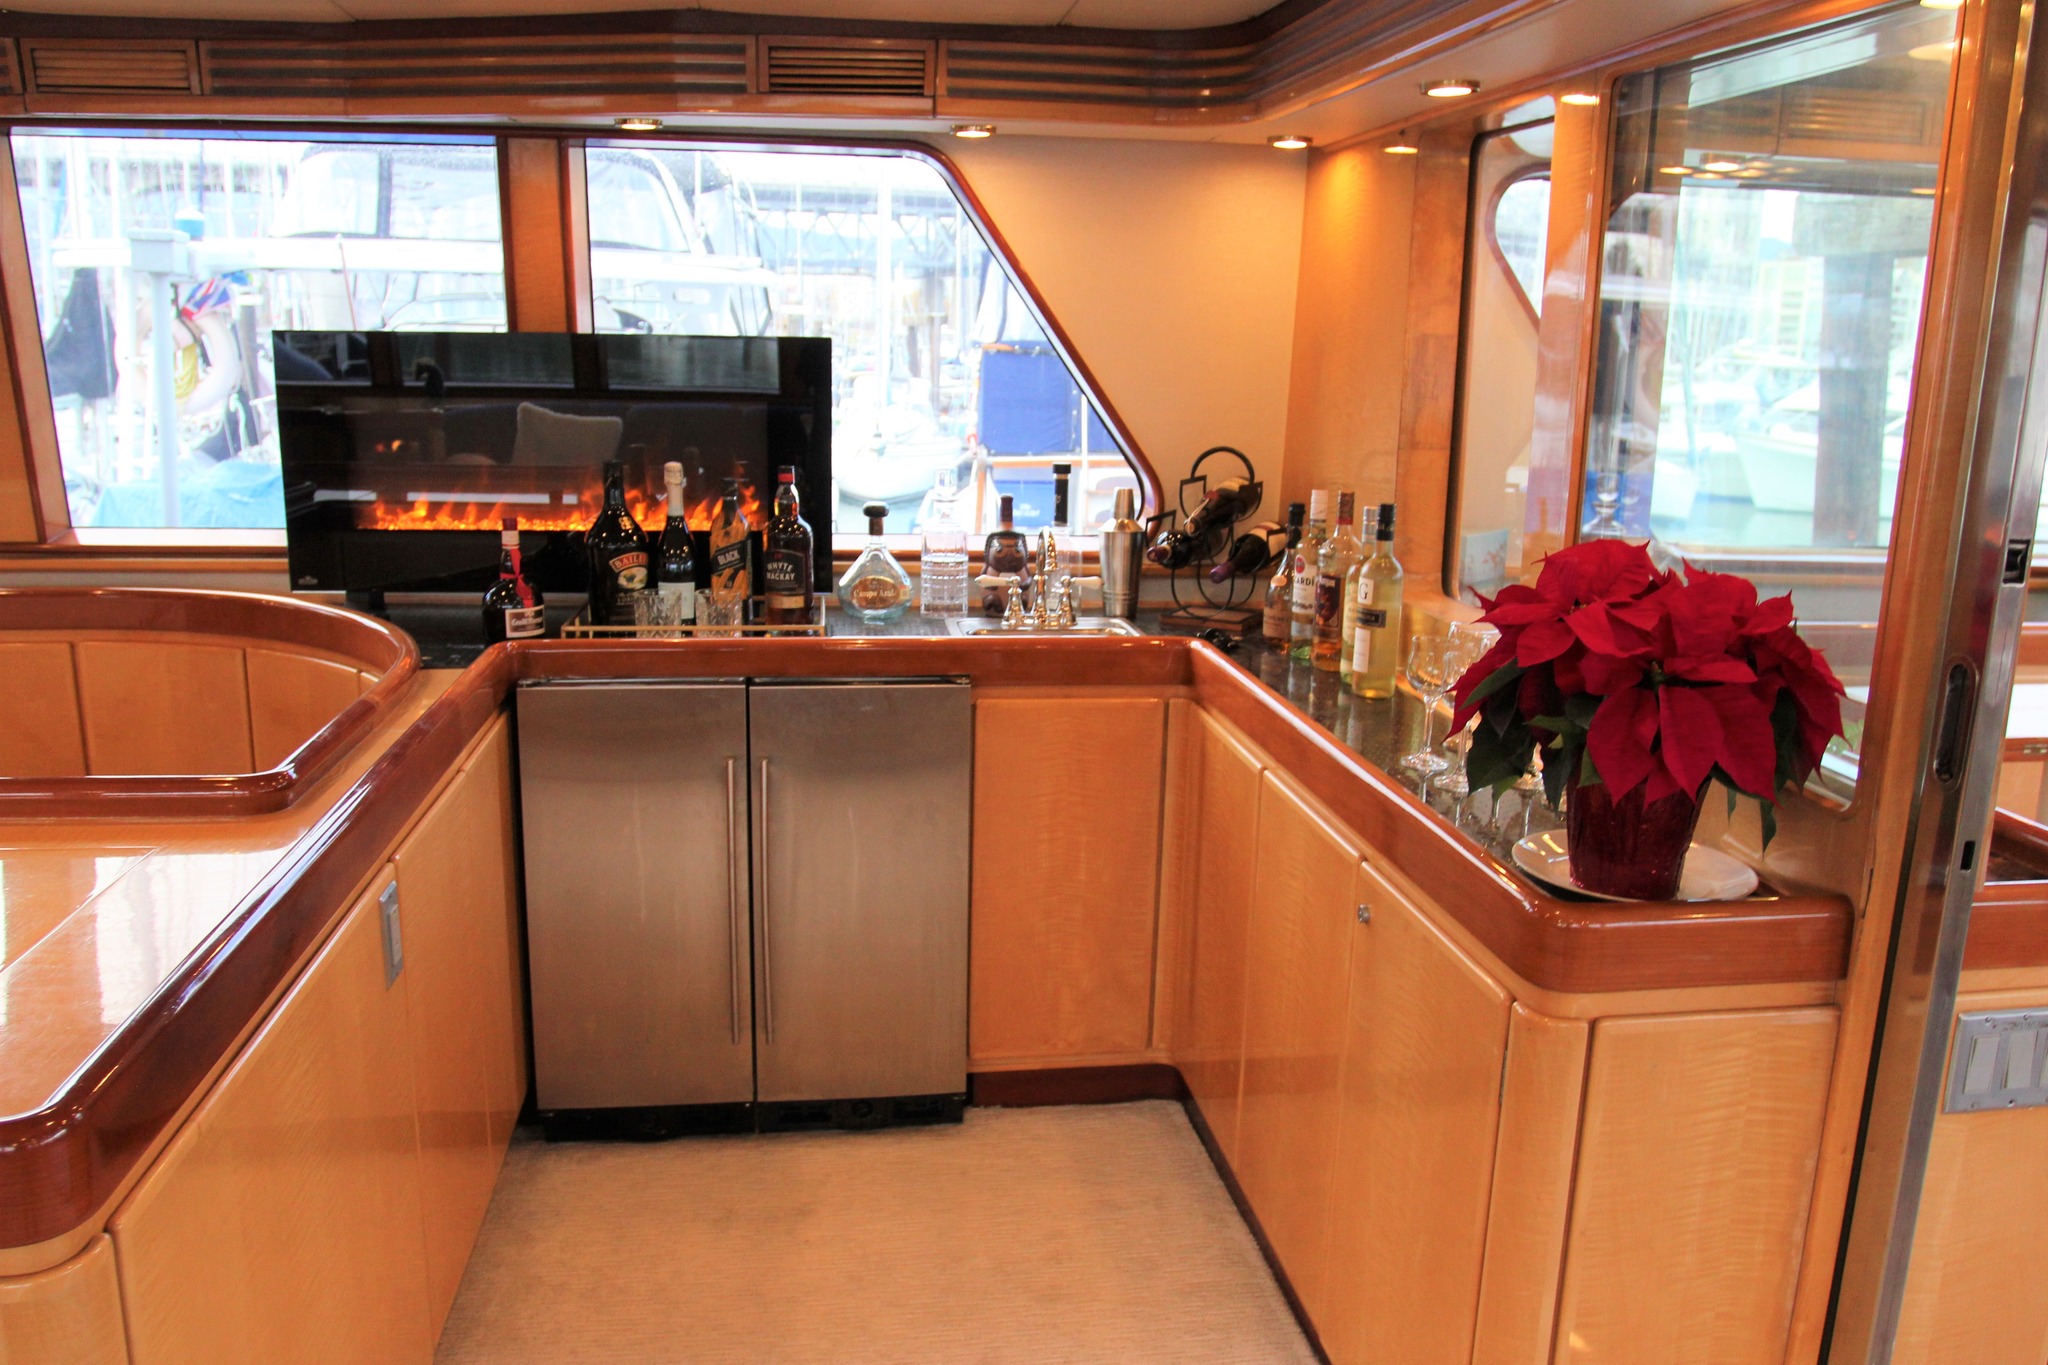 Bar area on a luxury yacht. Electric fireplace on the counter with a stainless steel fridge.